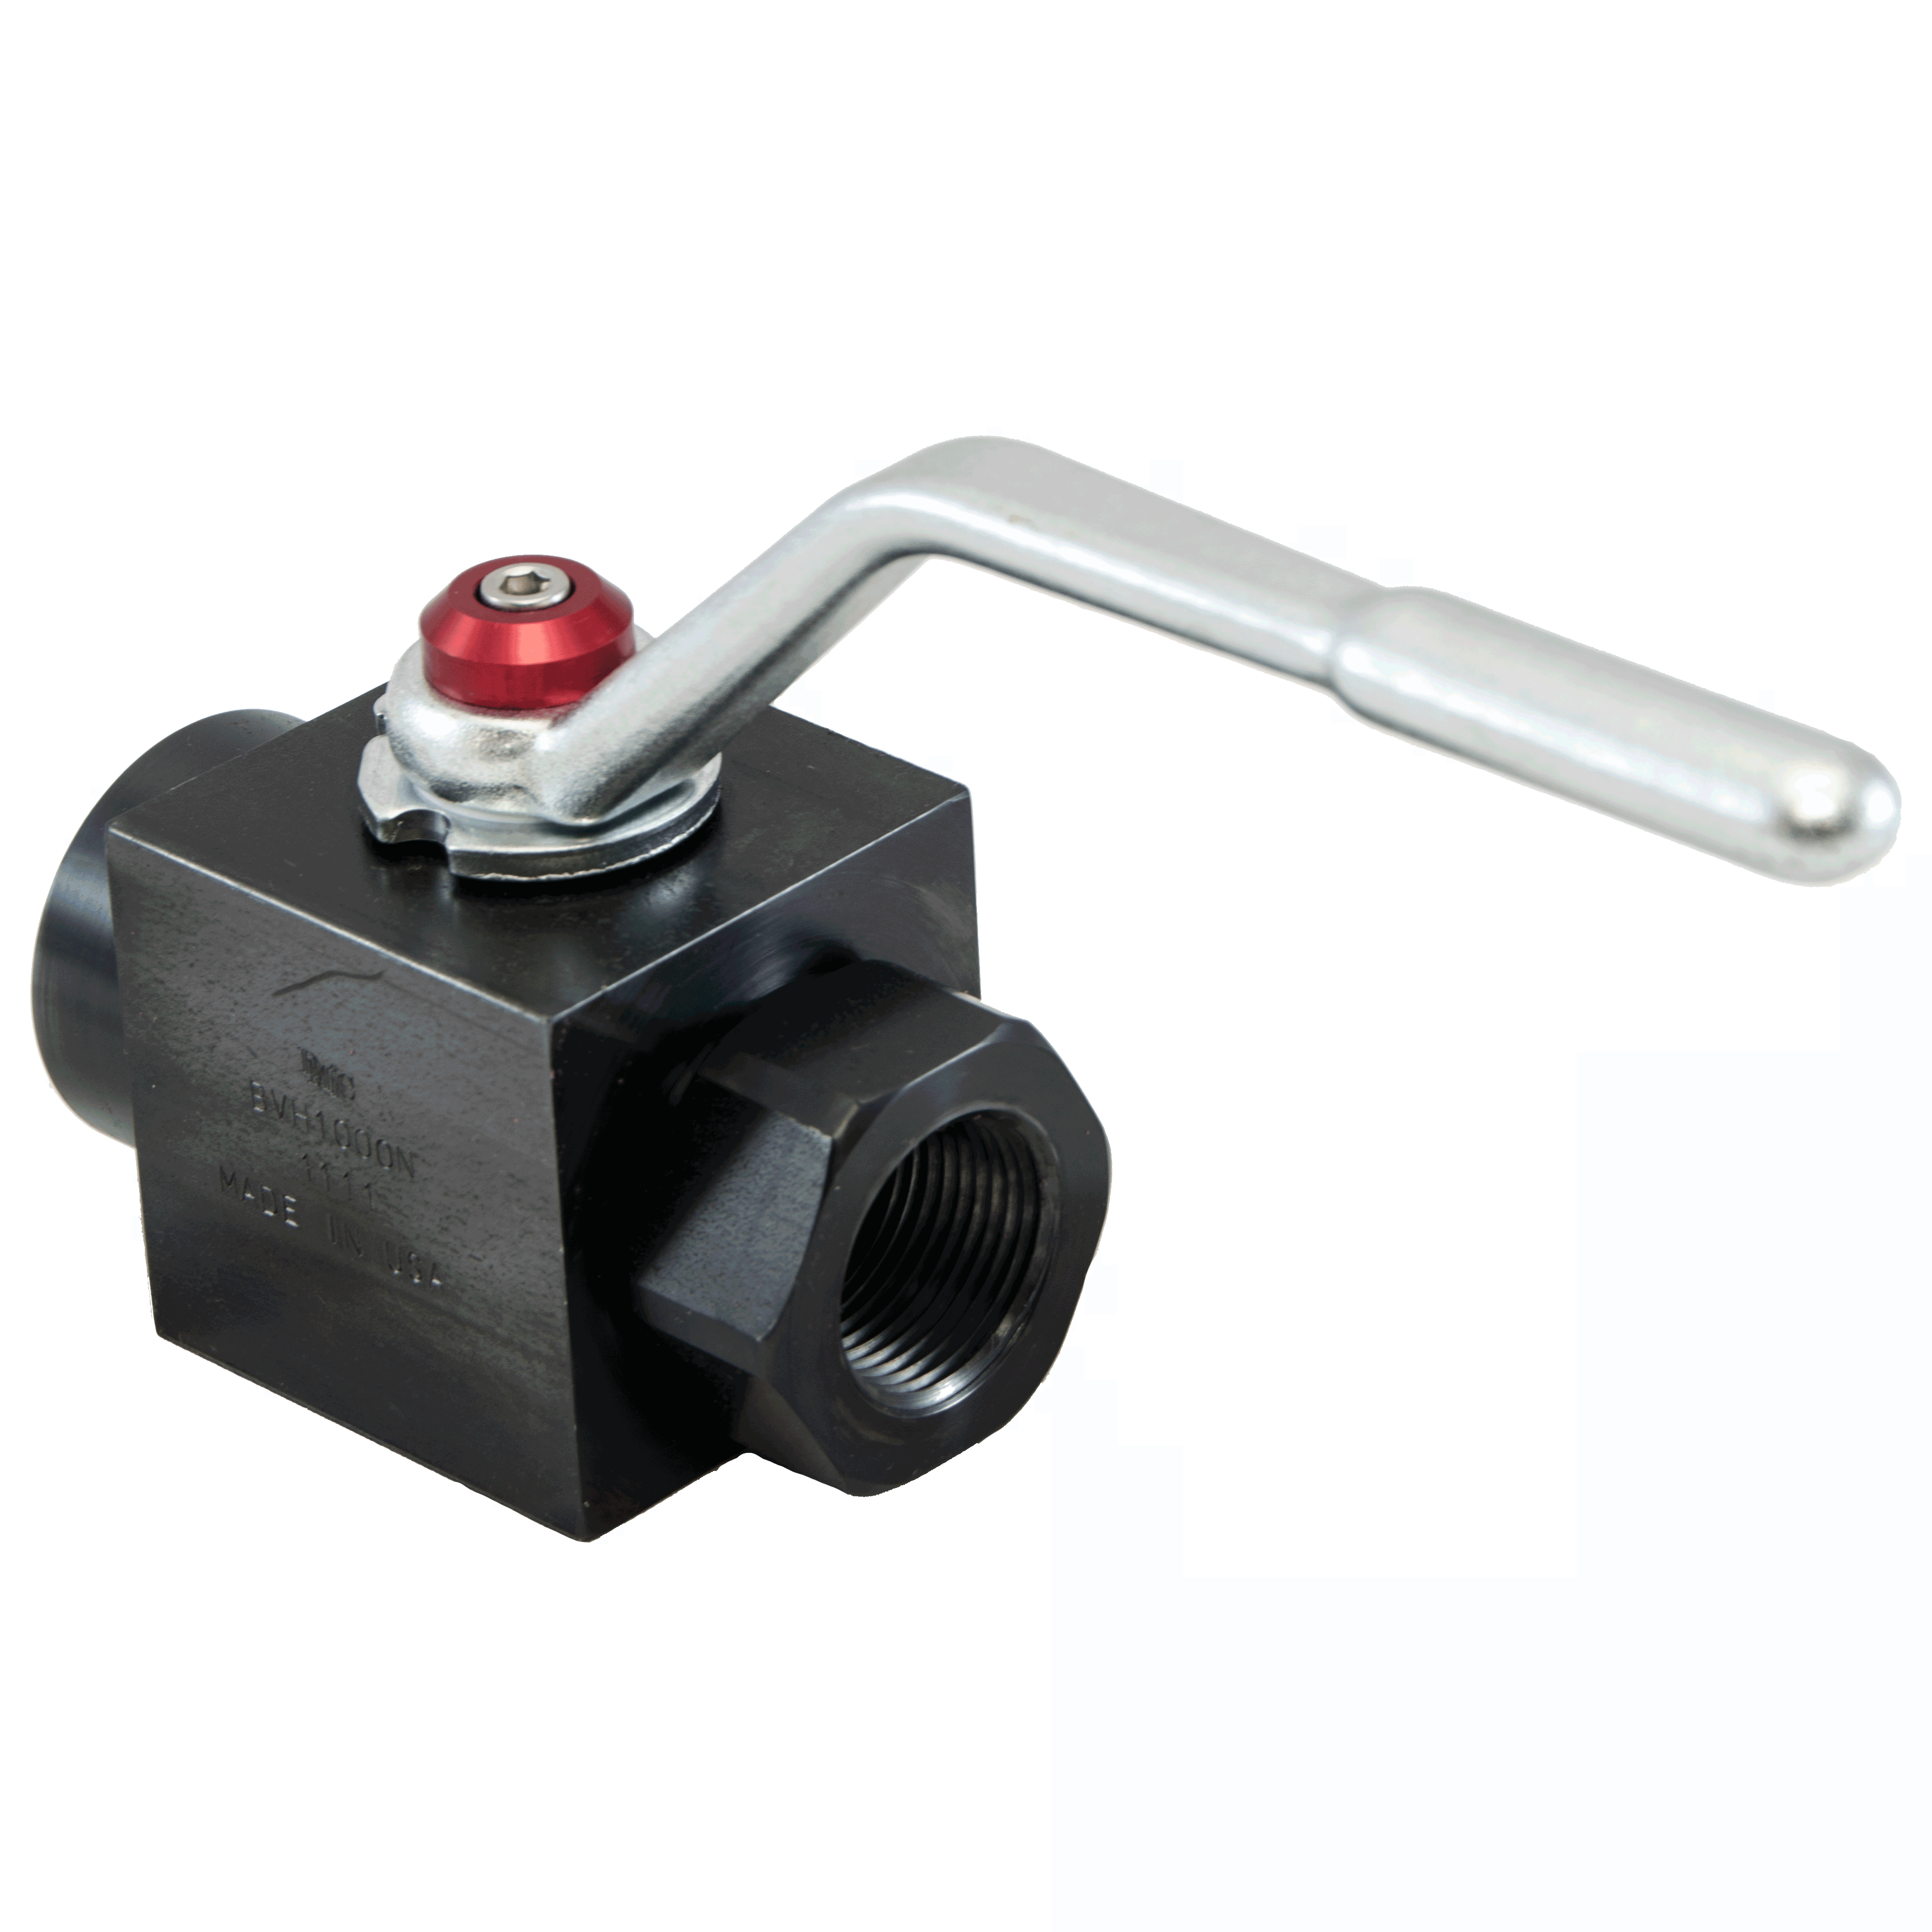 BVH-0500S-1111 : DMIC Square Body Ball Valve, #8 SAE (1/2), Carbon Steel, 7500psi, Two-Way